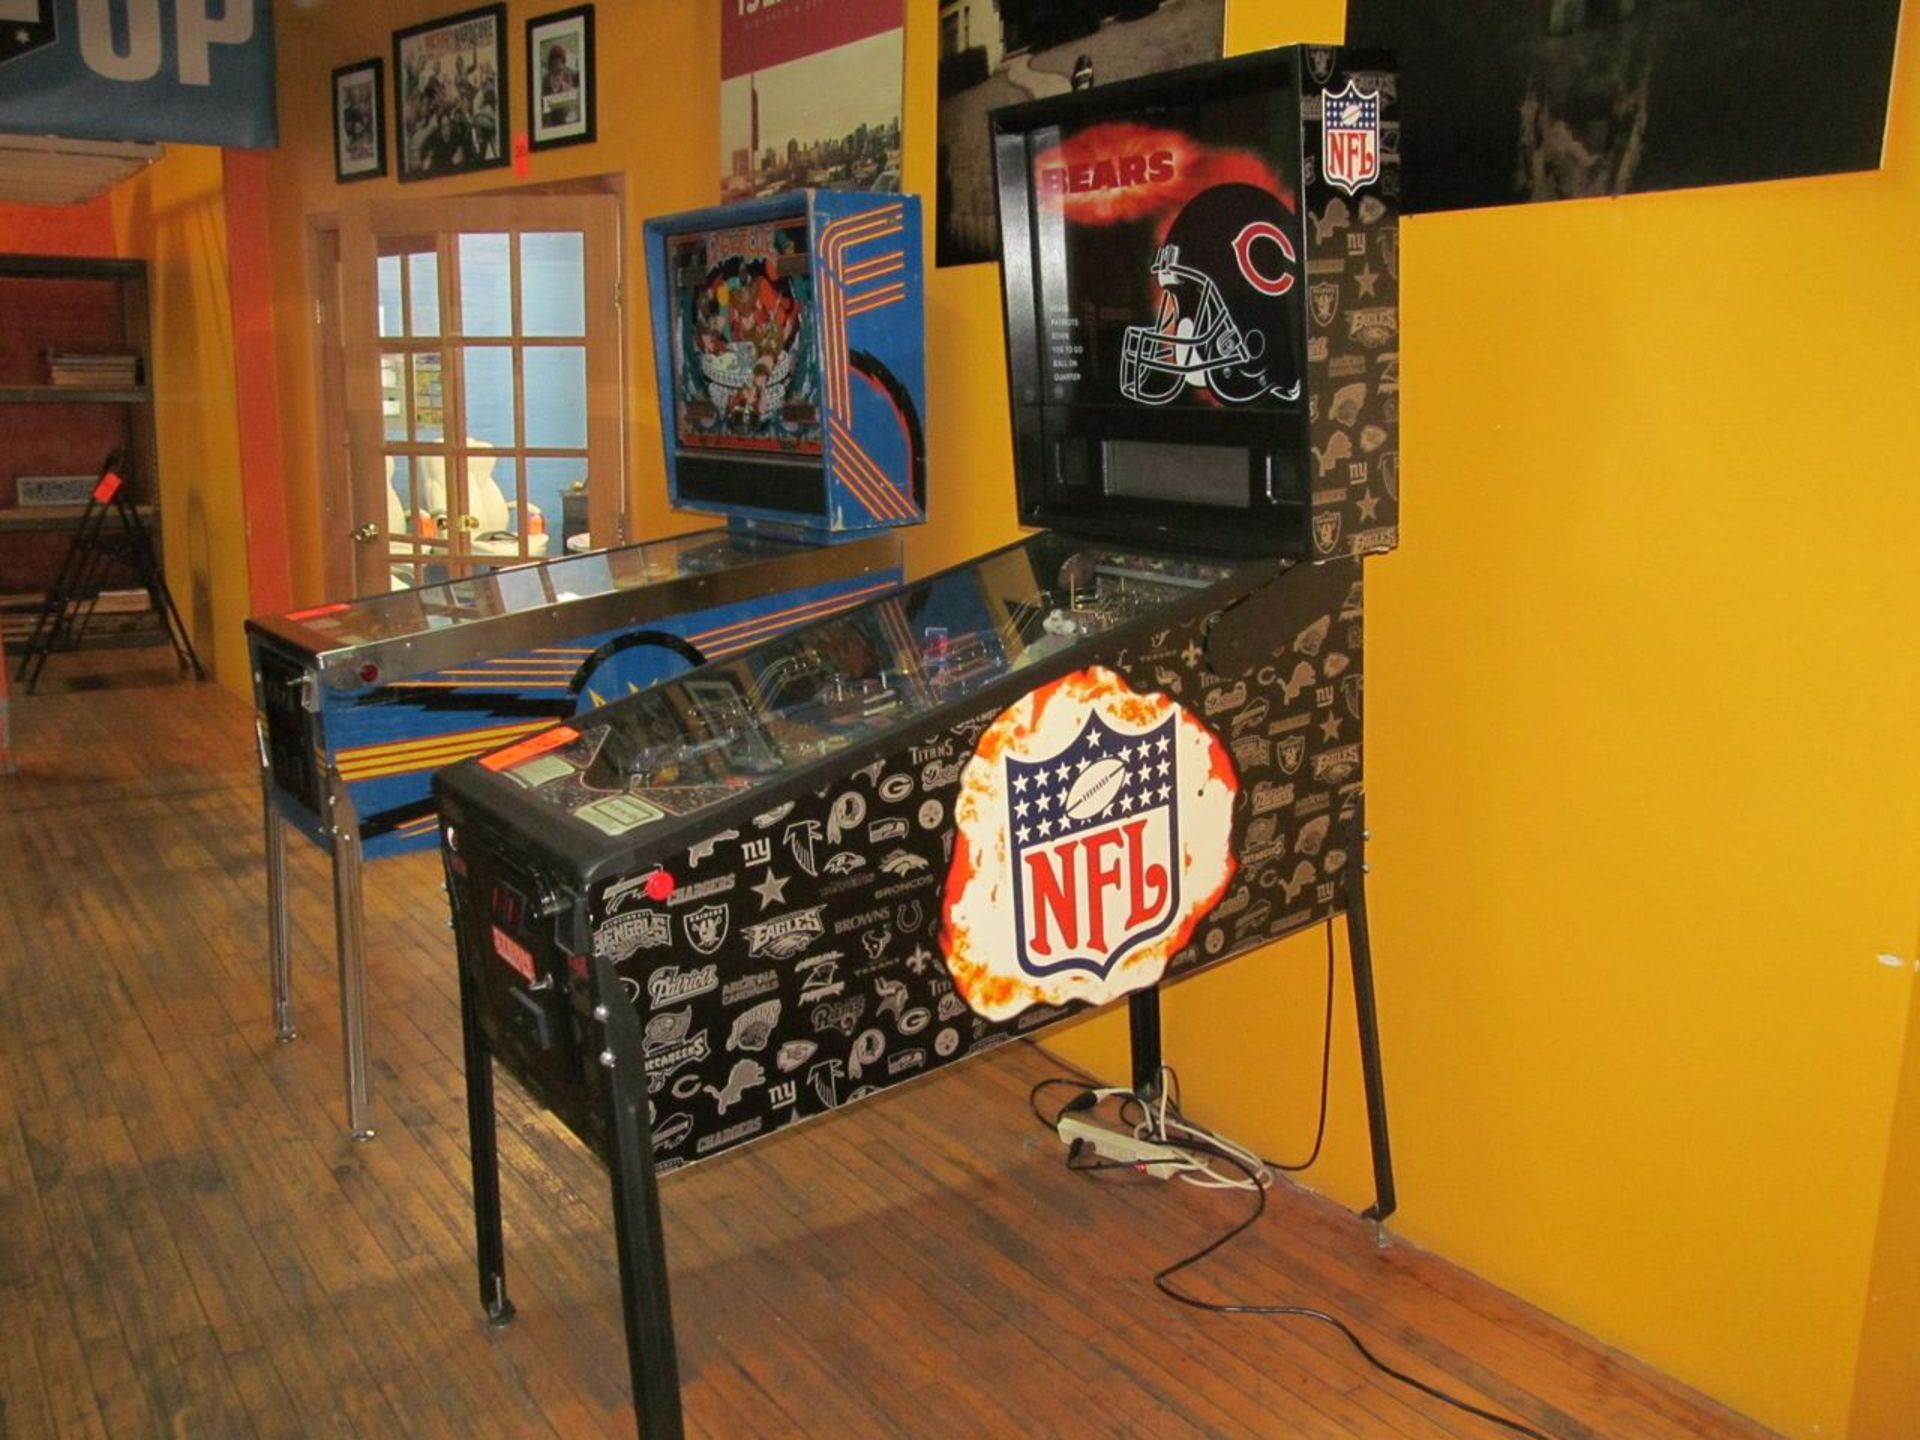 Stern Electronics "Chicago Bears" Pinball Machine (Sold - Subject to Approval)